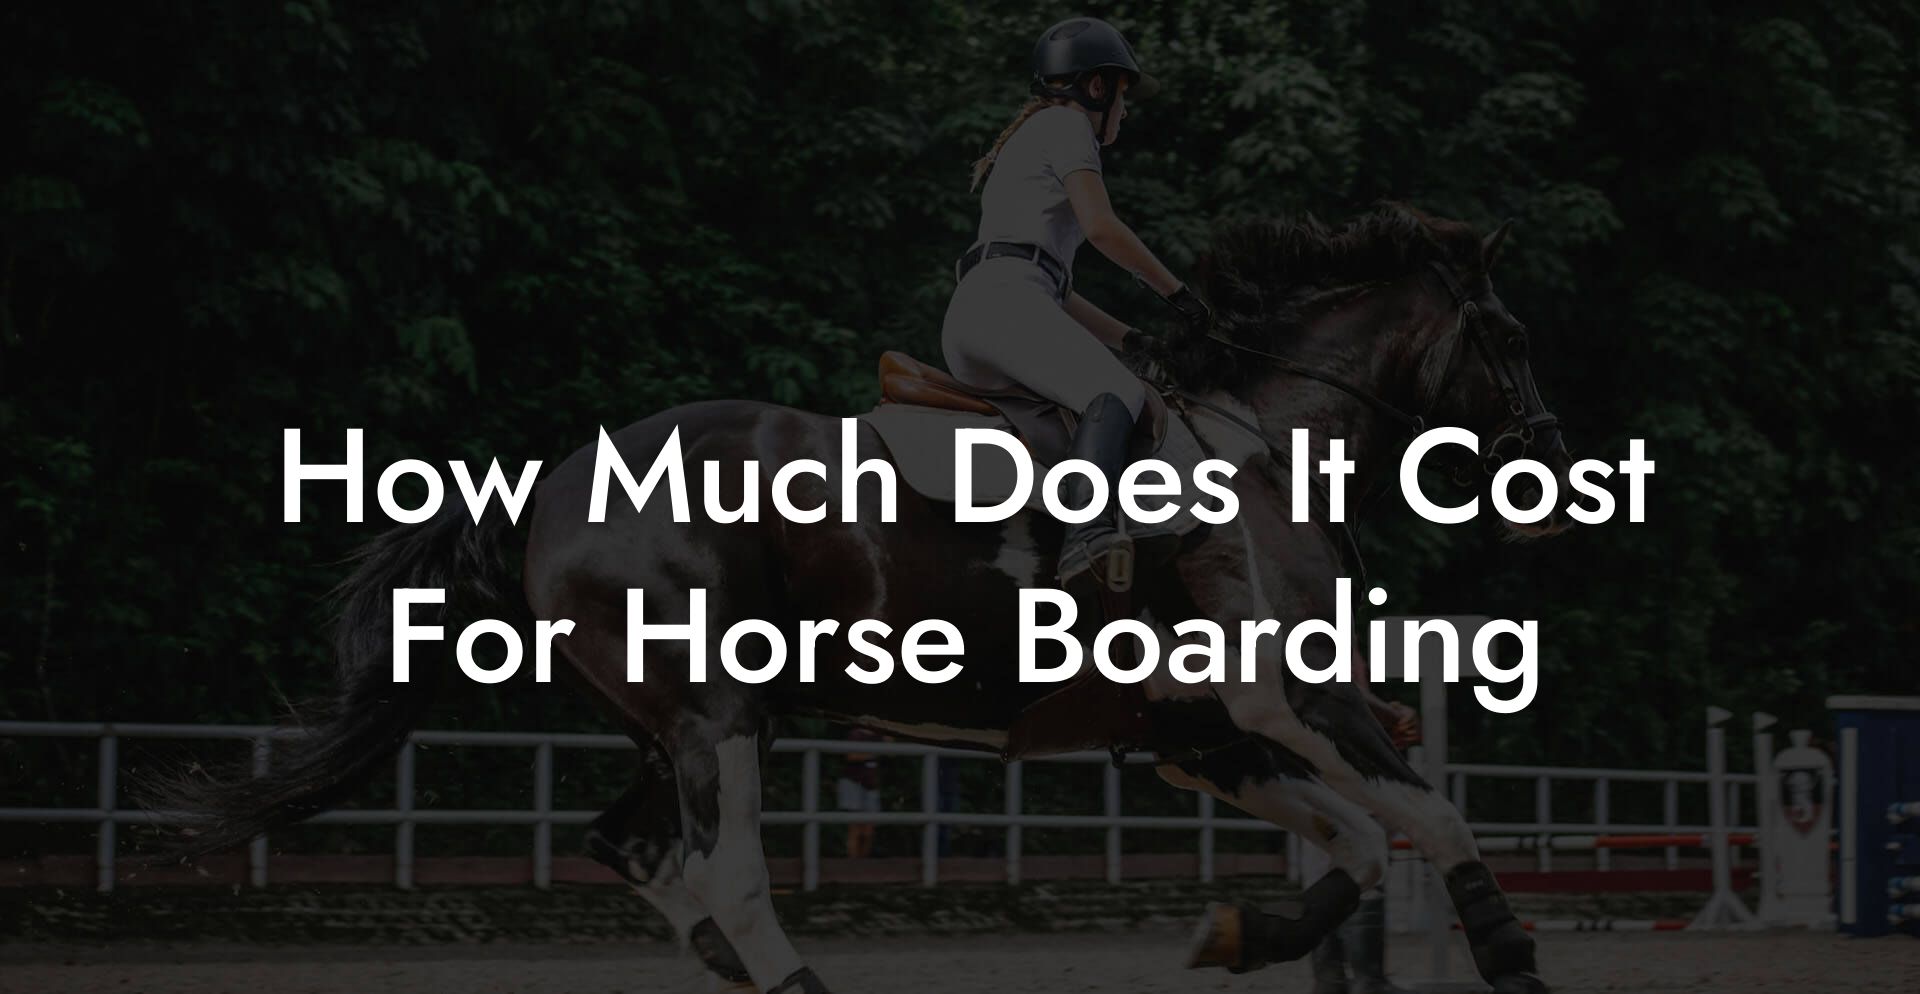 How Much Does It Cost For Horse Boarding